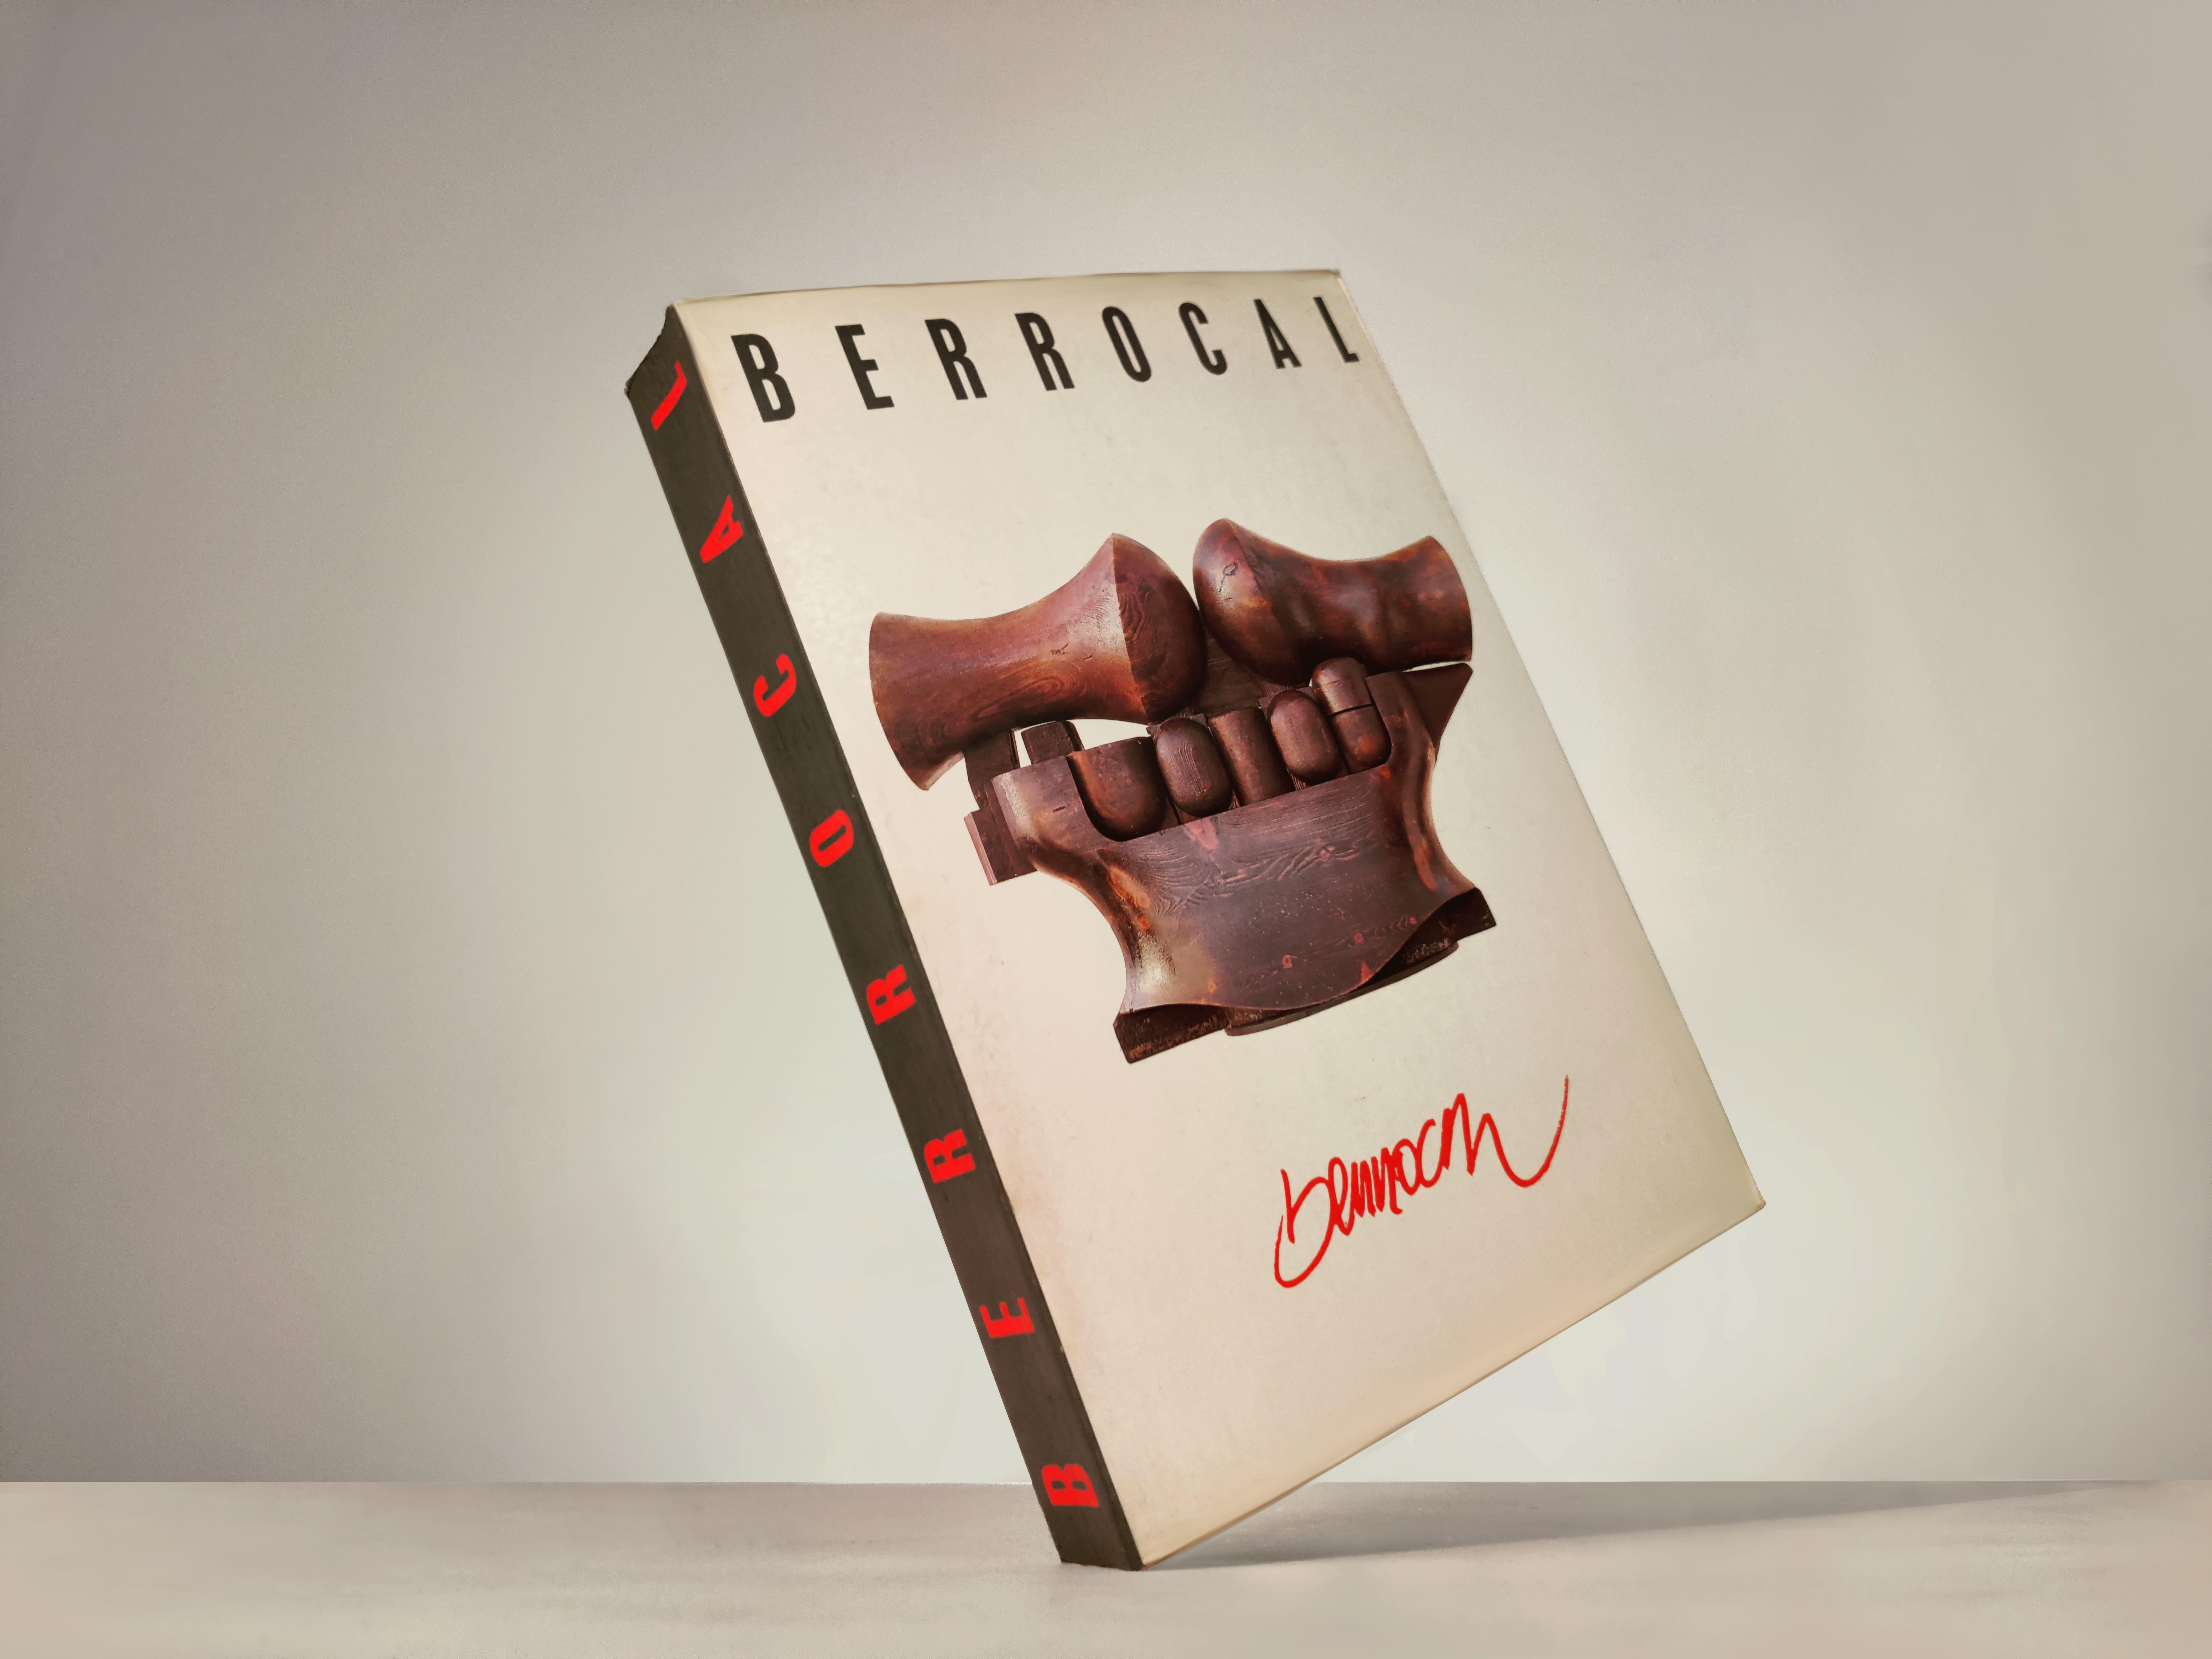 Exceptional and extensive compilation of the magnificent work and autobiography of Miguel Berrocal, ranging from exhibitions and collections to his monumental works, passing through his workshop, distinctions, technical sheets and much more. All